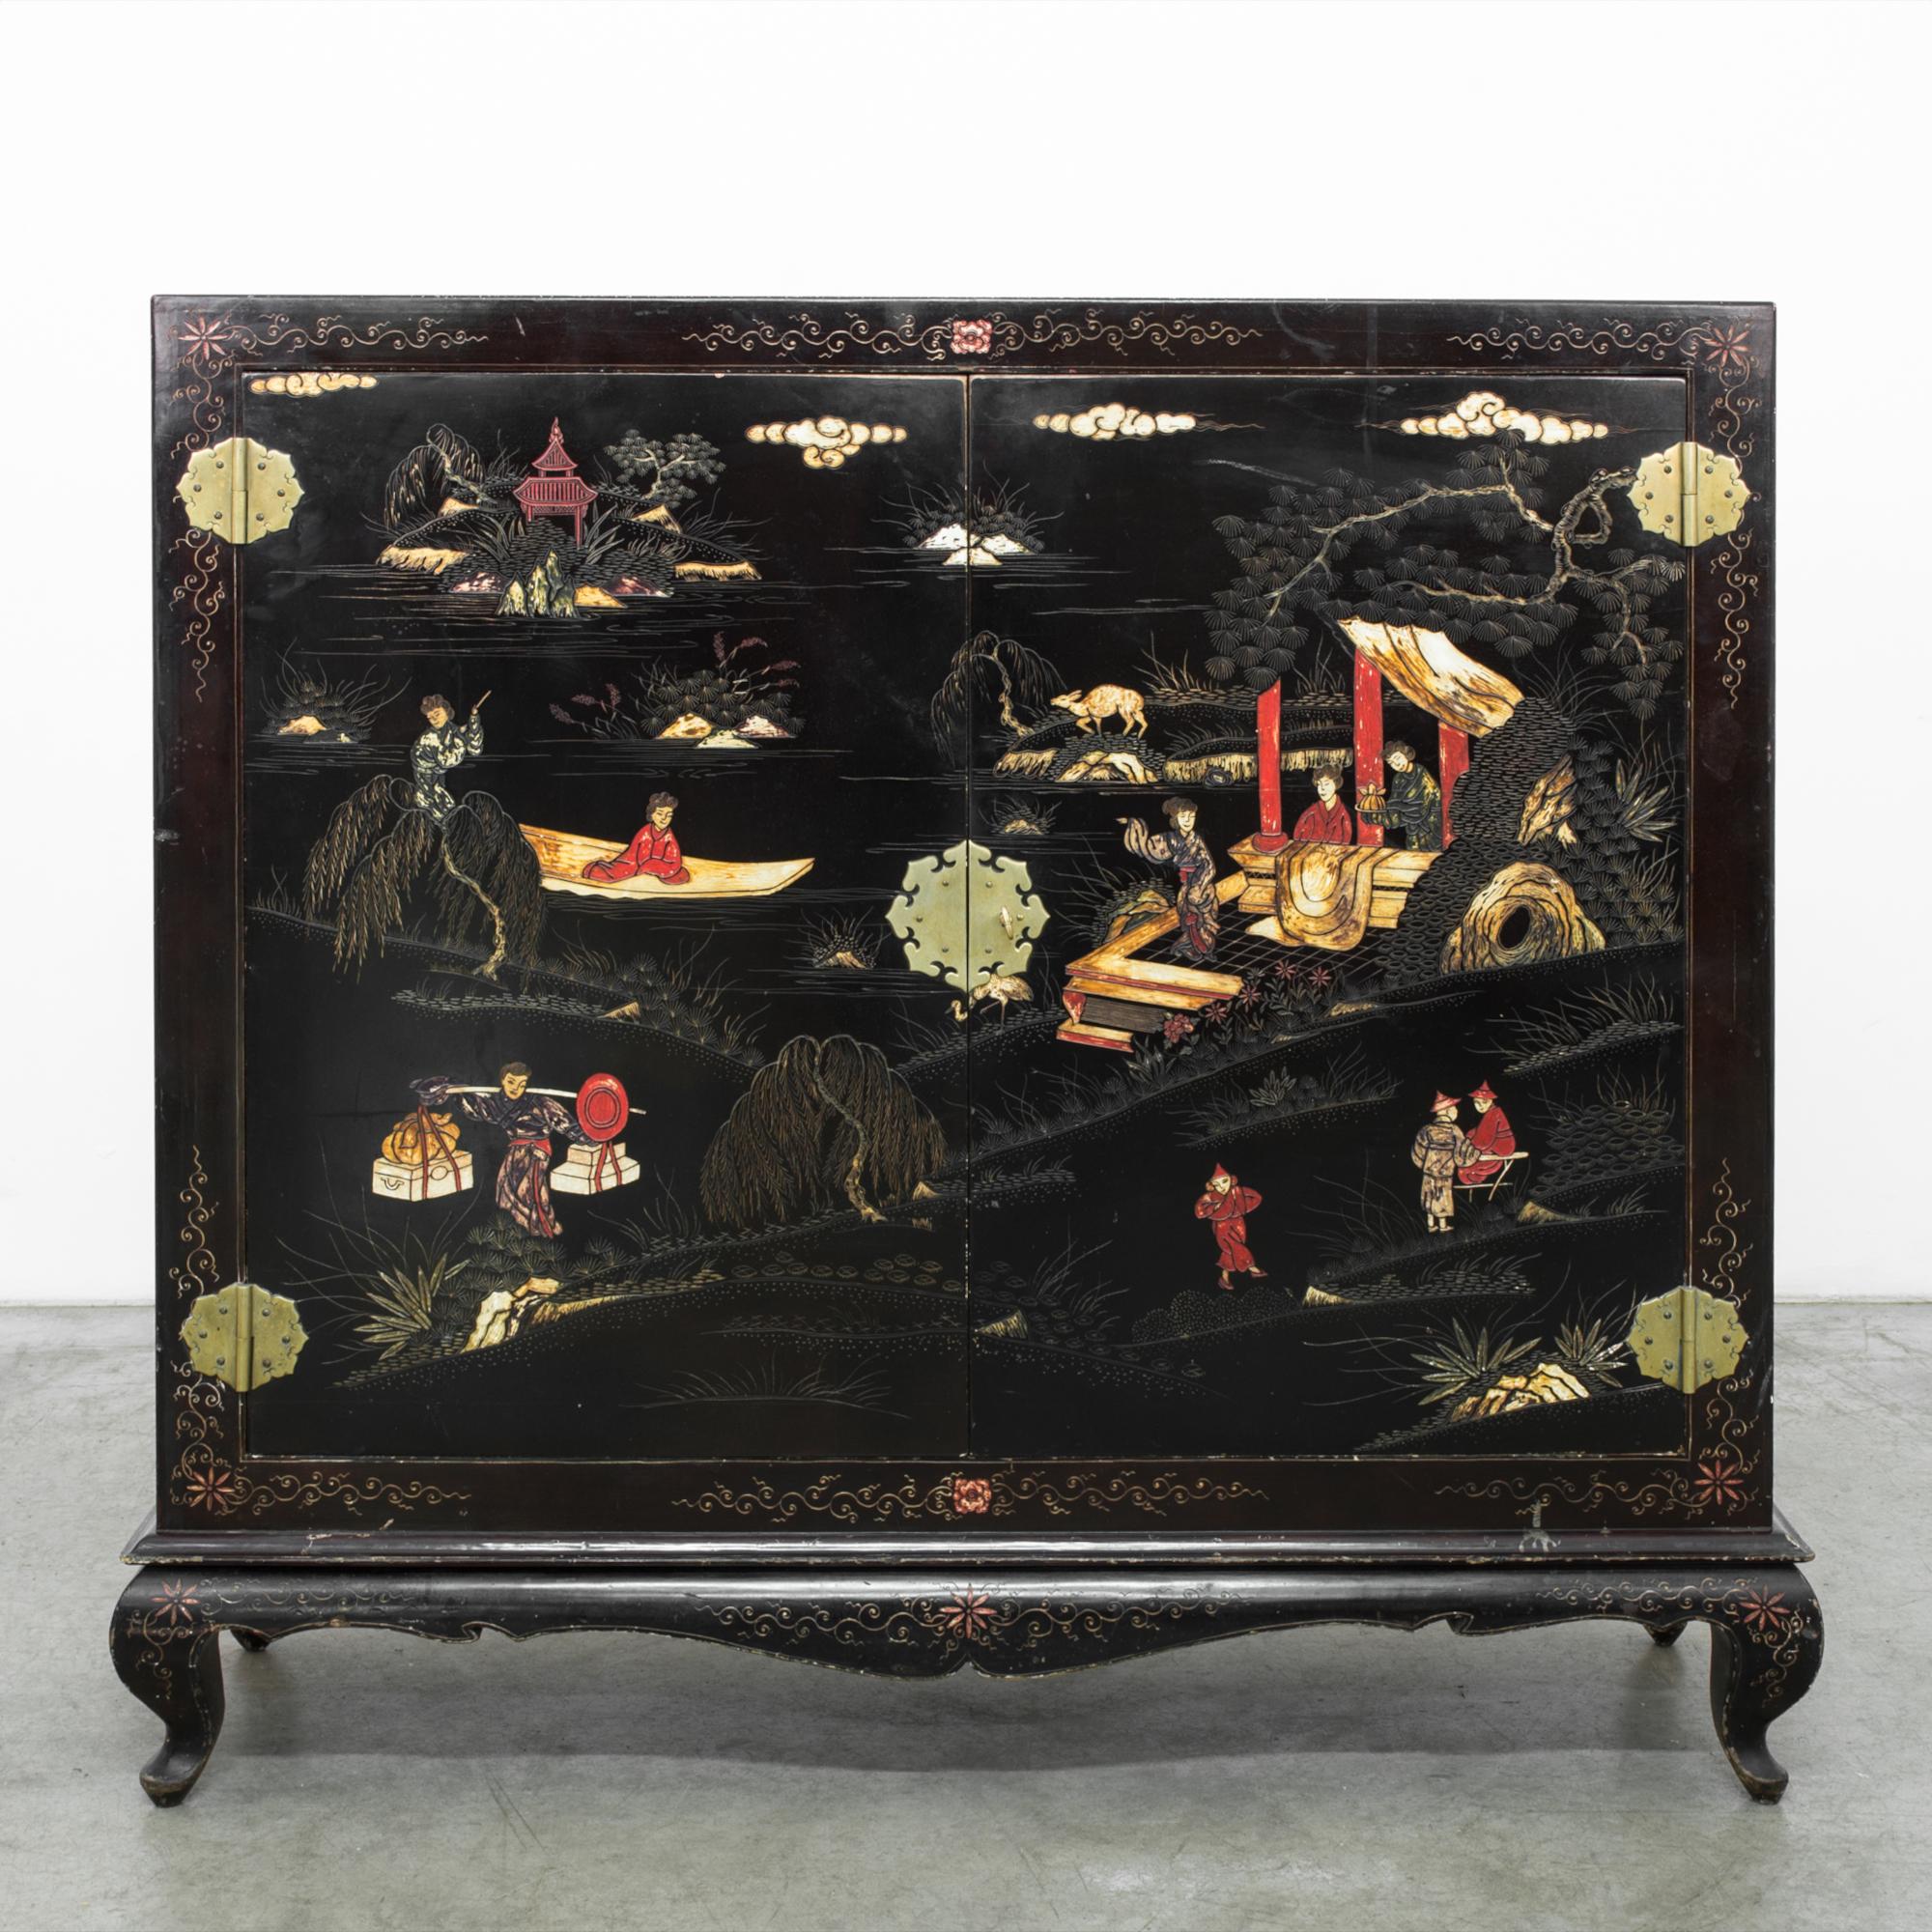 A wood patinated buffet from China, circa 1970. A beautiful black lacquered cabinet, ornately decorated with a carved and painted landscape. Double doors hold three shelves, with brass flower petal hinges and lock plate. An etched floral motif rings